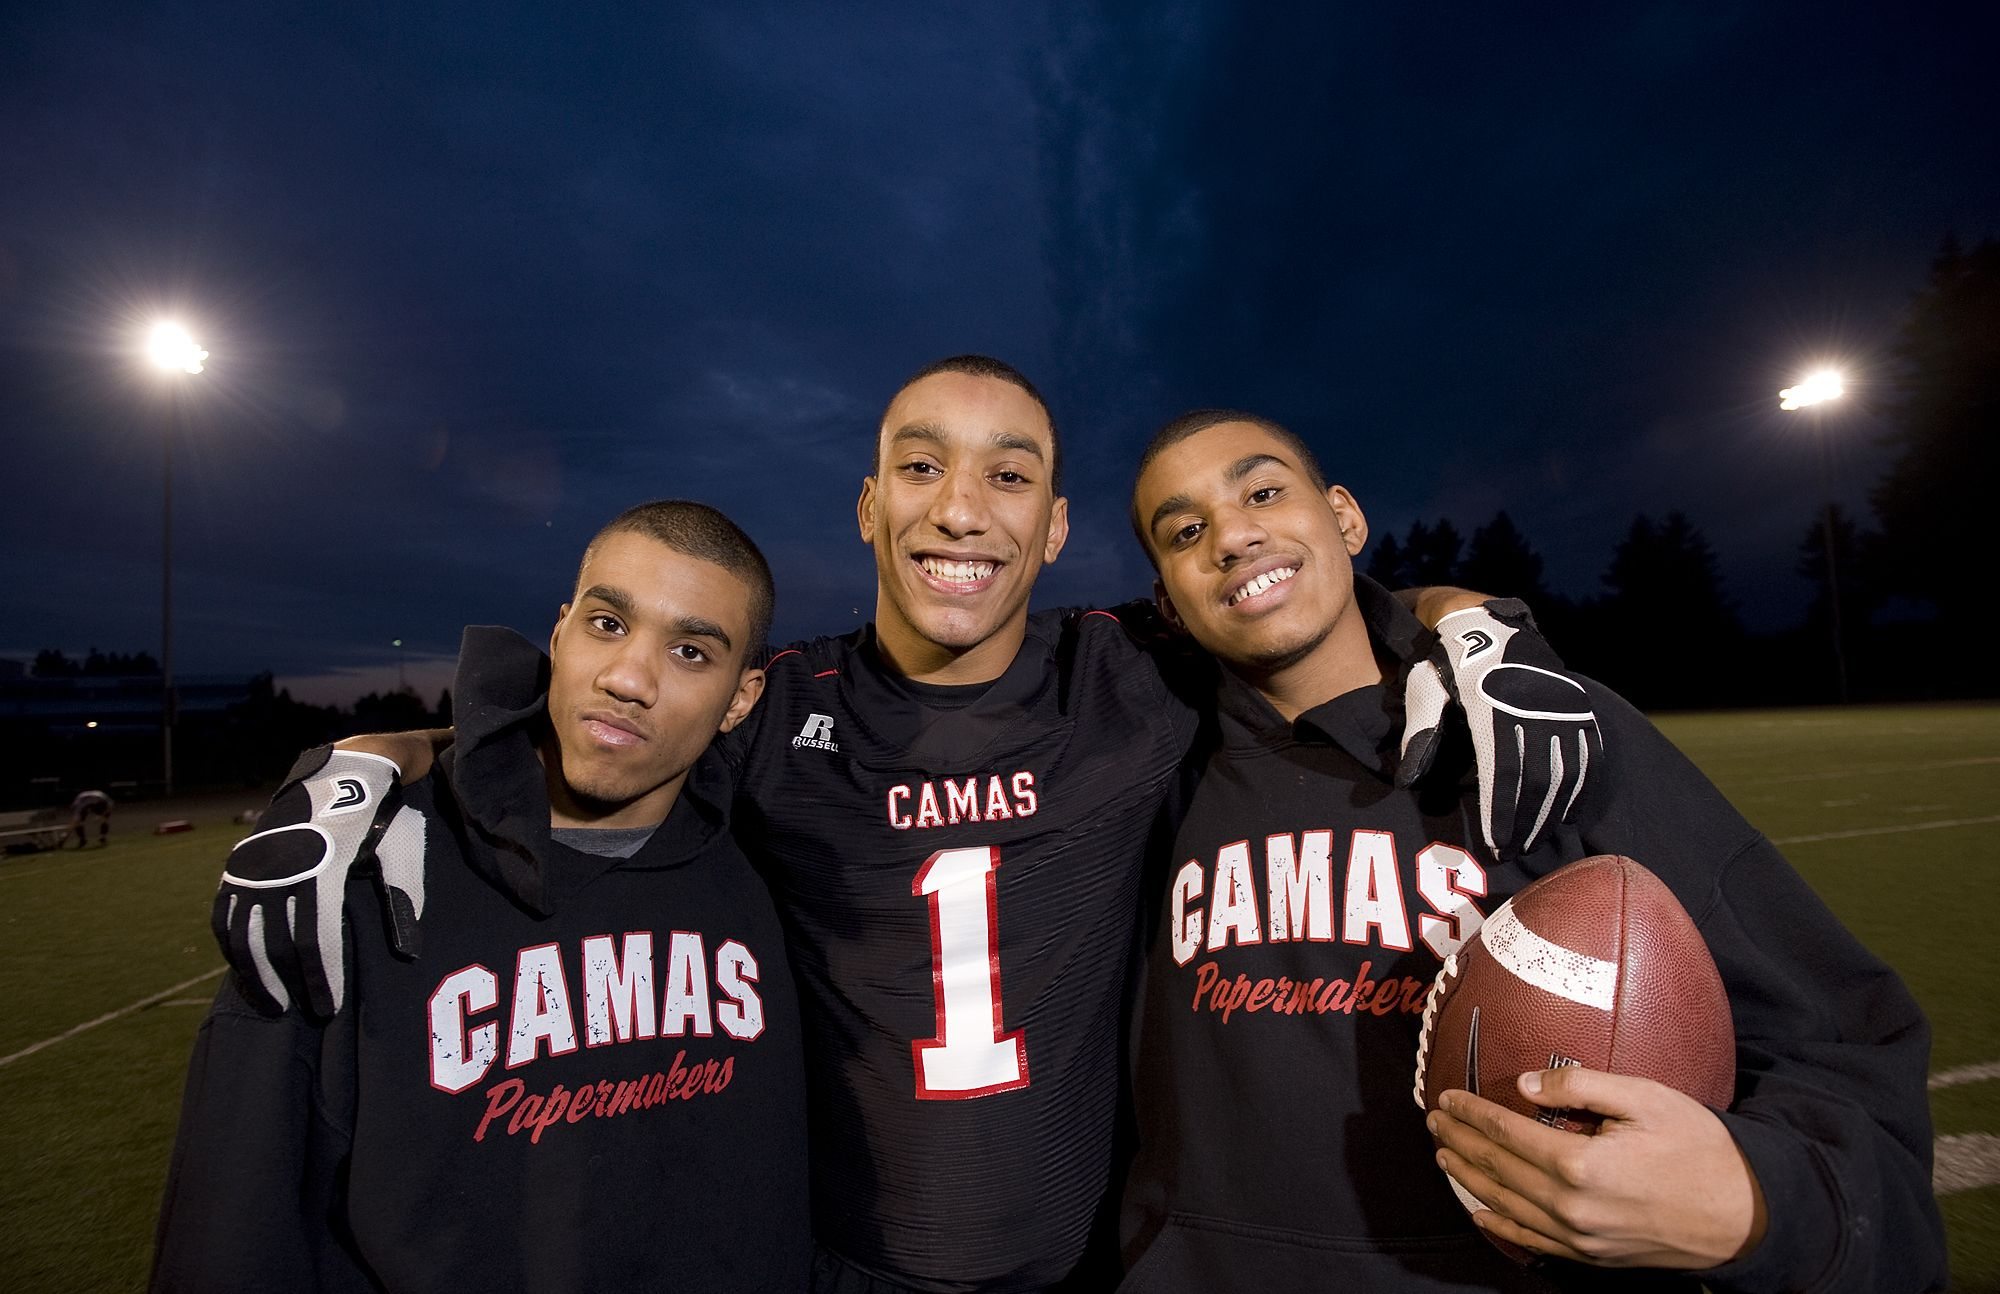 Jonathan Warner, center, poses with his autistic twin brothers, Christian, left, and Austin, at Camas High School.